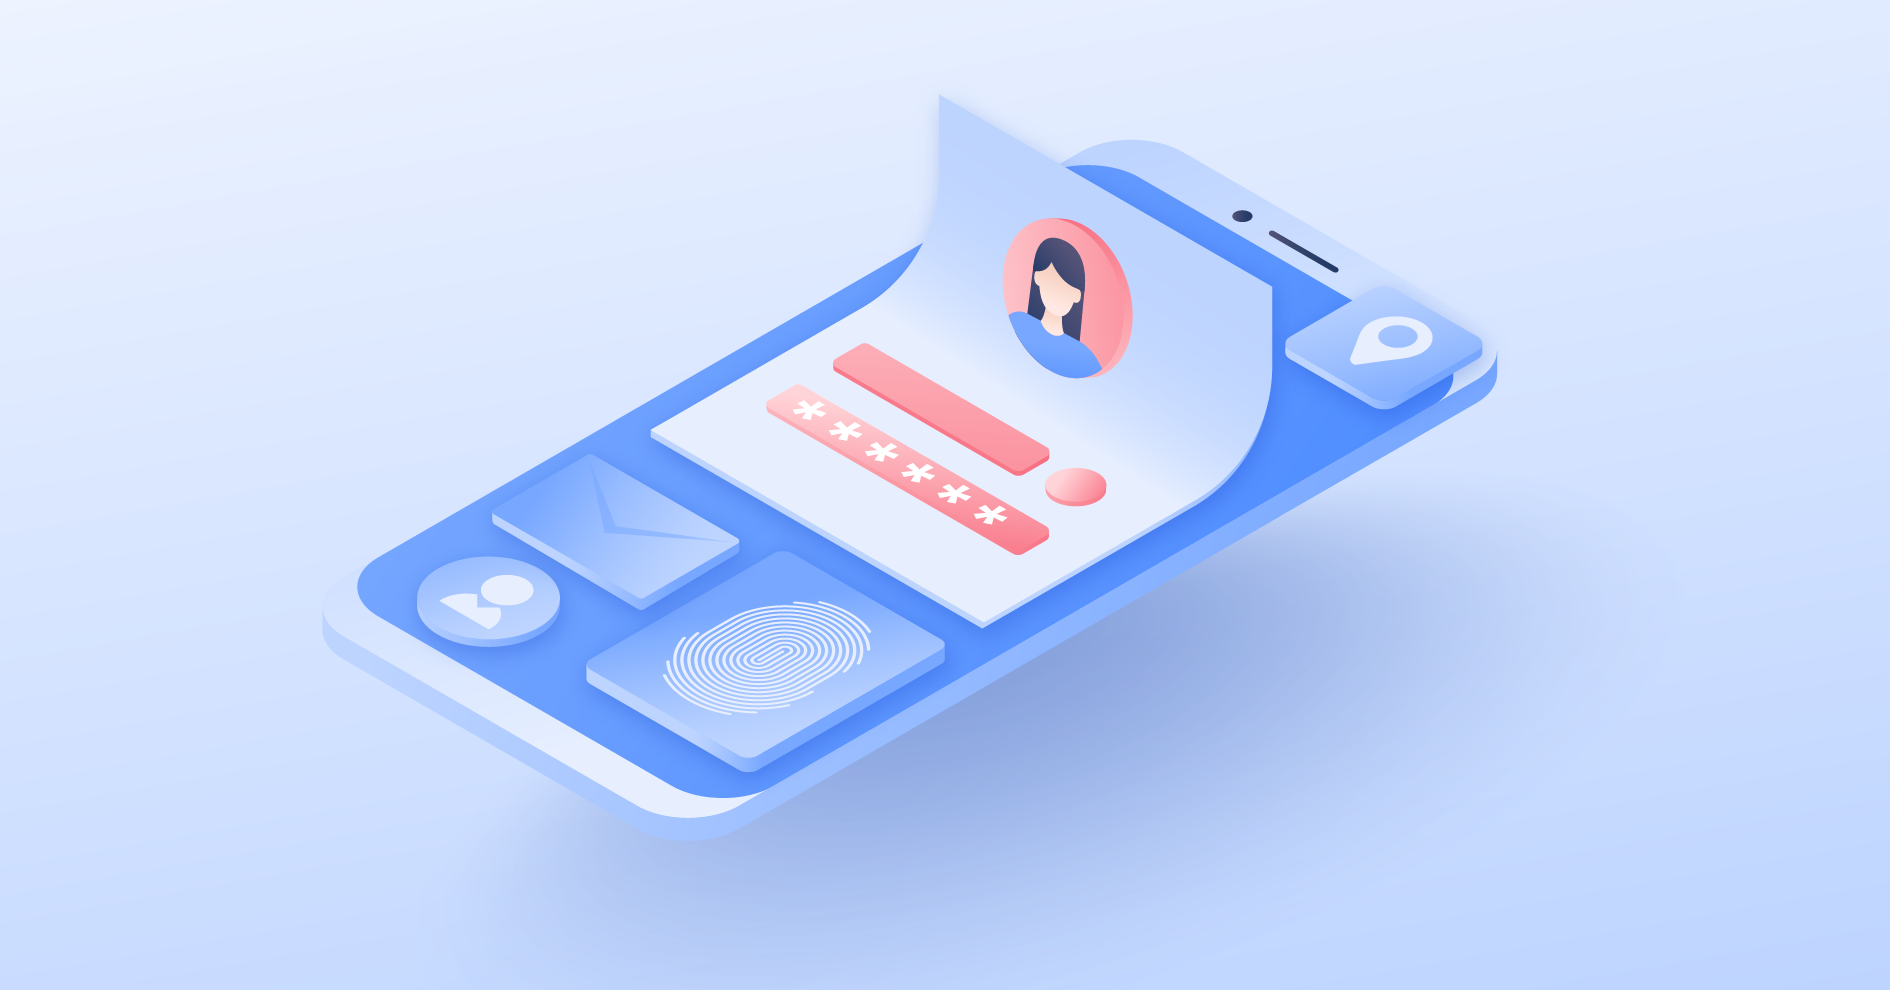 App tracking: How to protect your data privacy